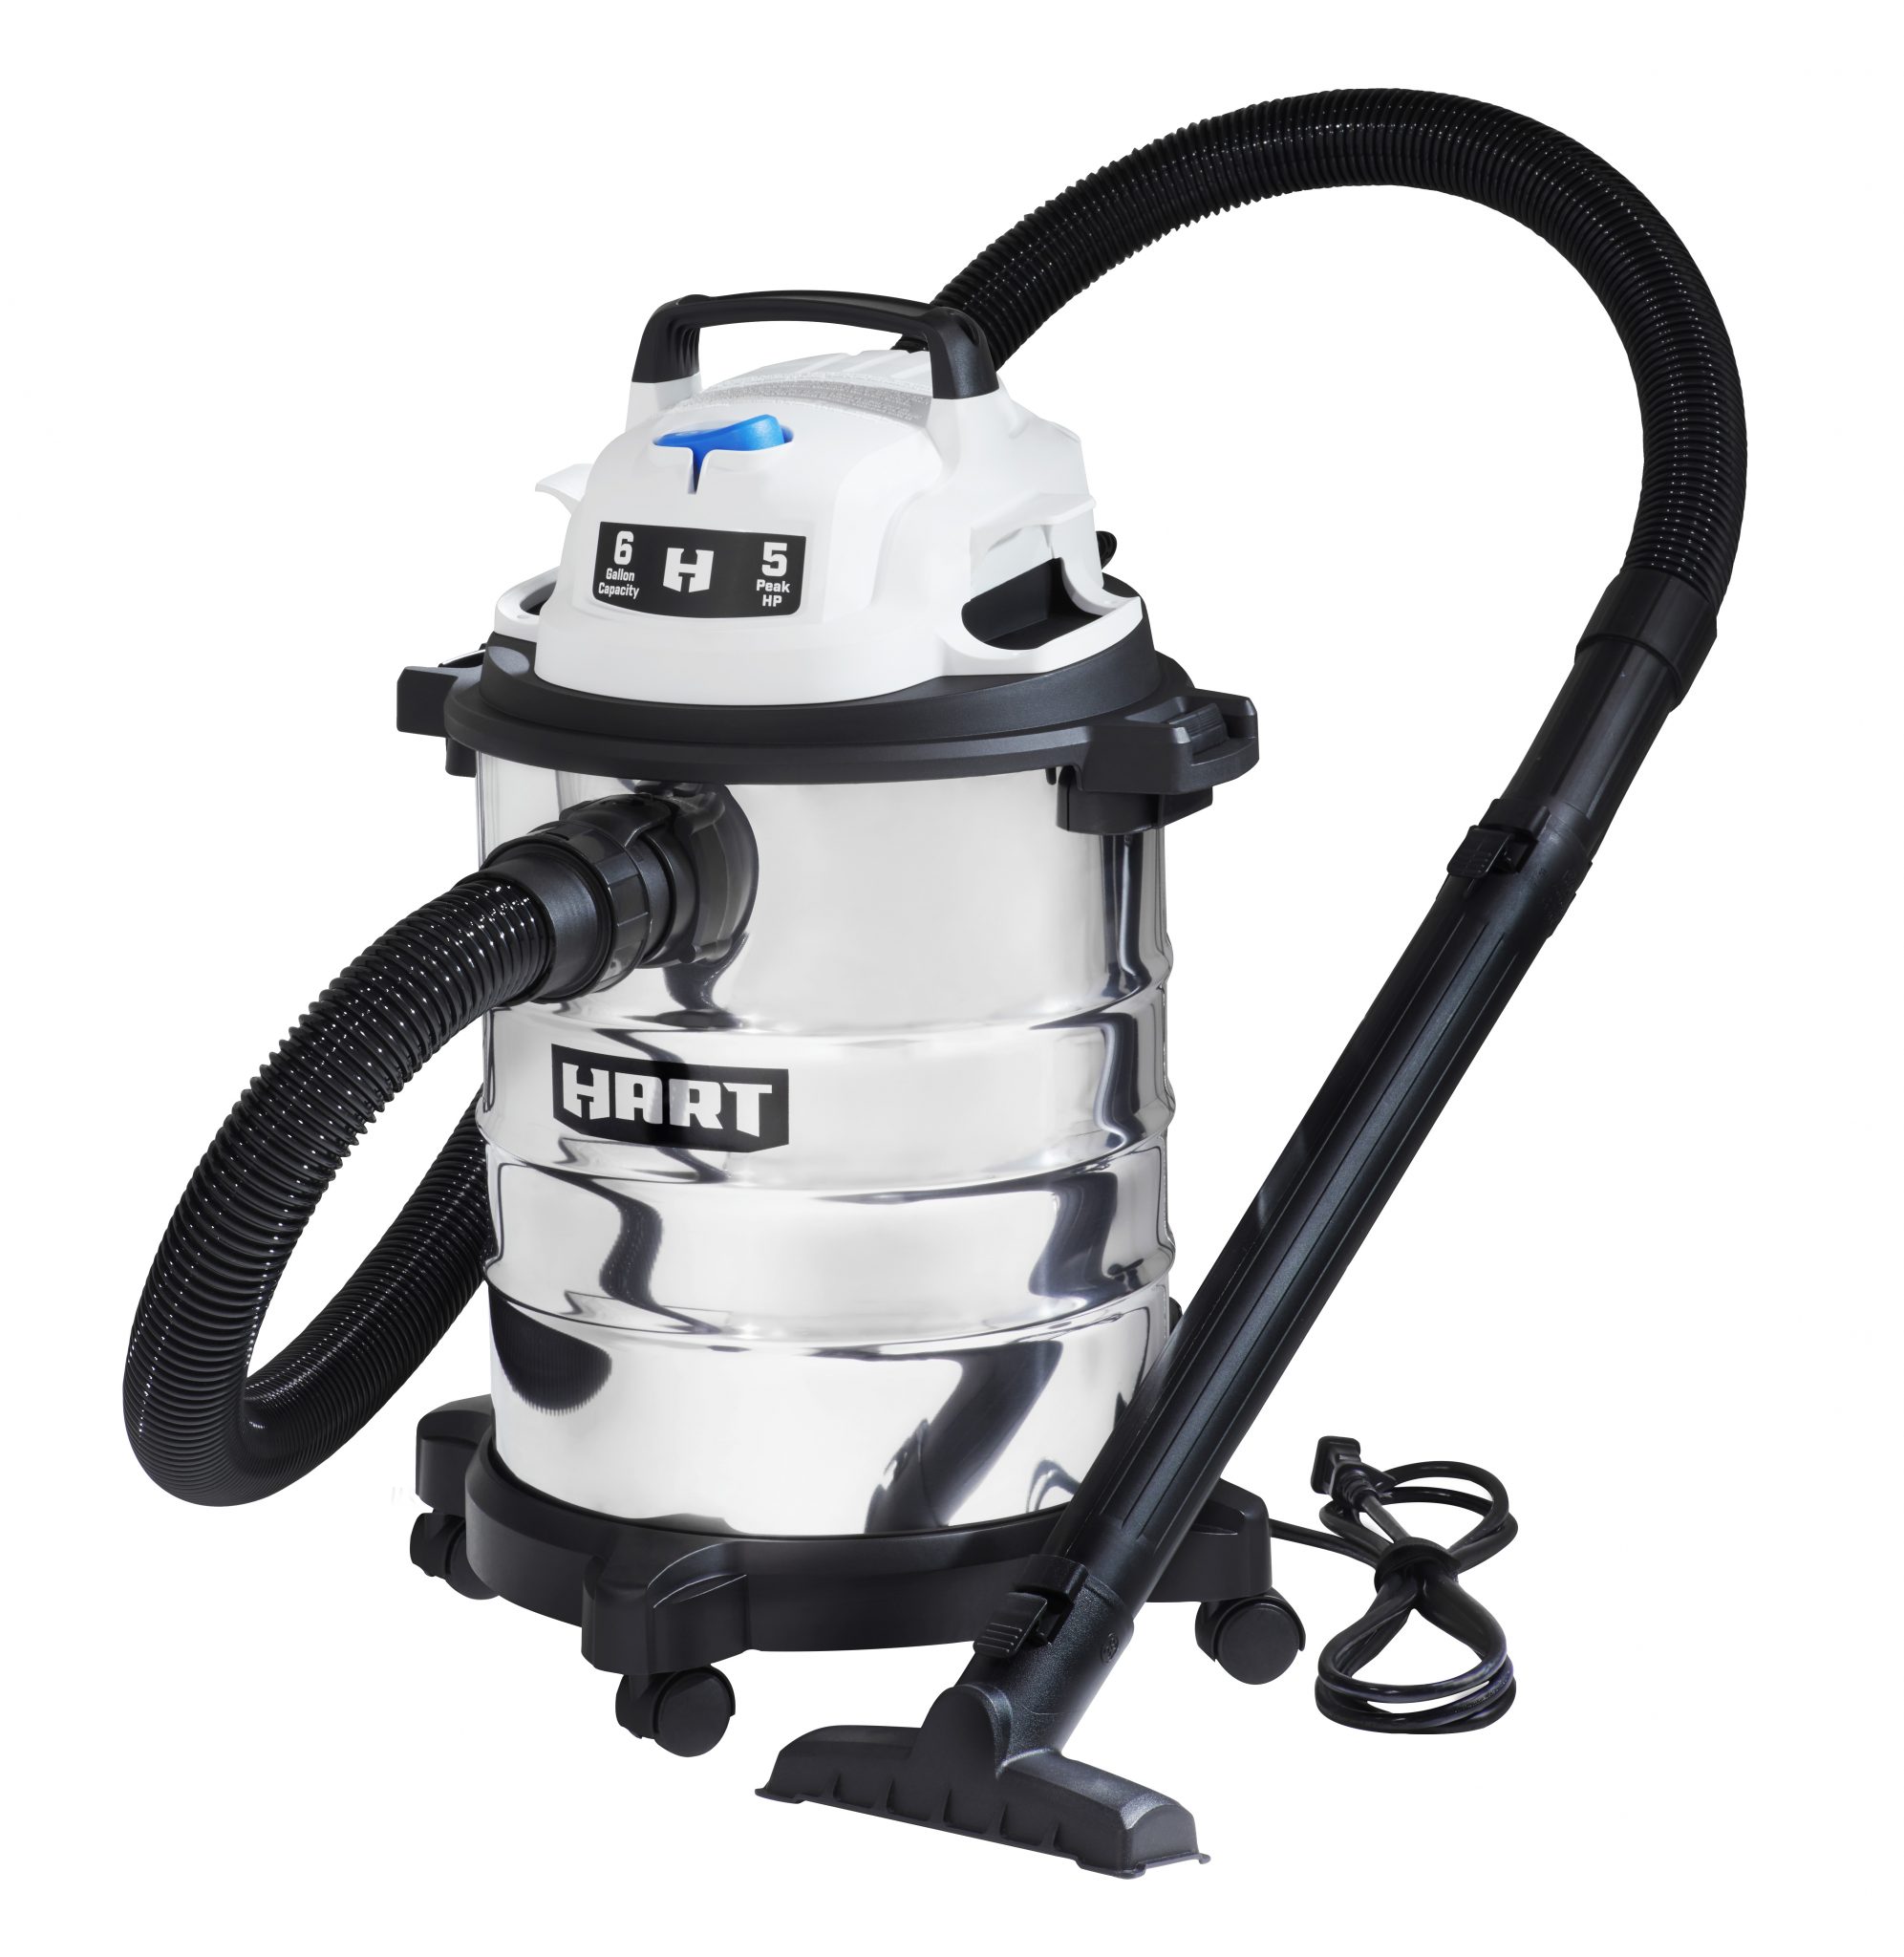 LIVE NOW: Hart 6 Gallon Stainless Steel Tank Wet/Dry Vacuum $29.00 Hart 6 Gallon Stainless Steel 5 Hp Wet/dry Vacuum